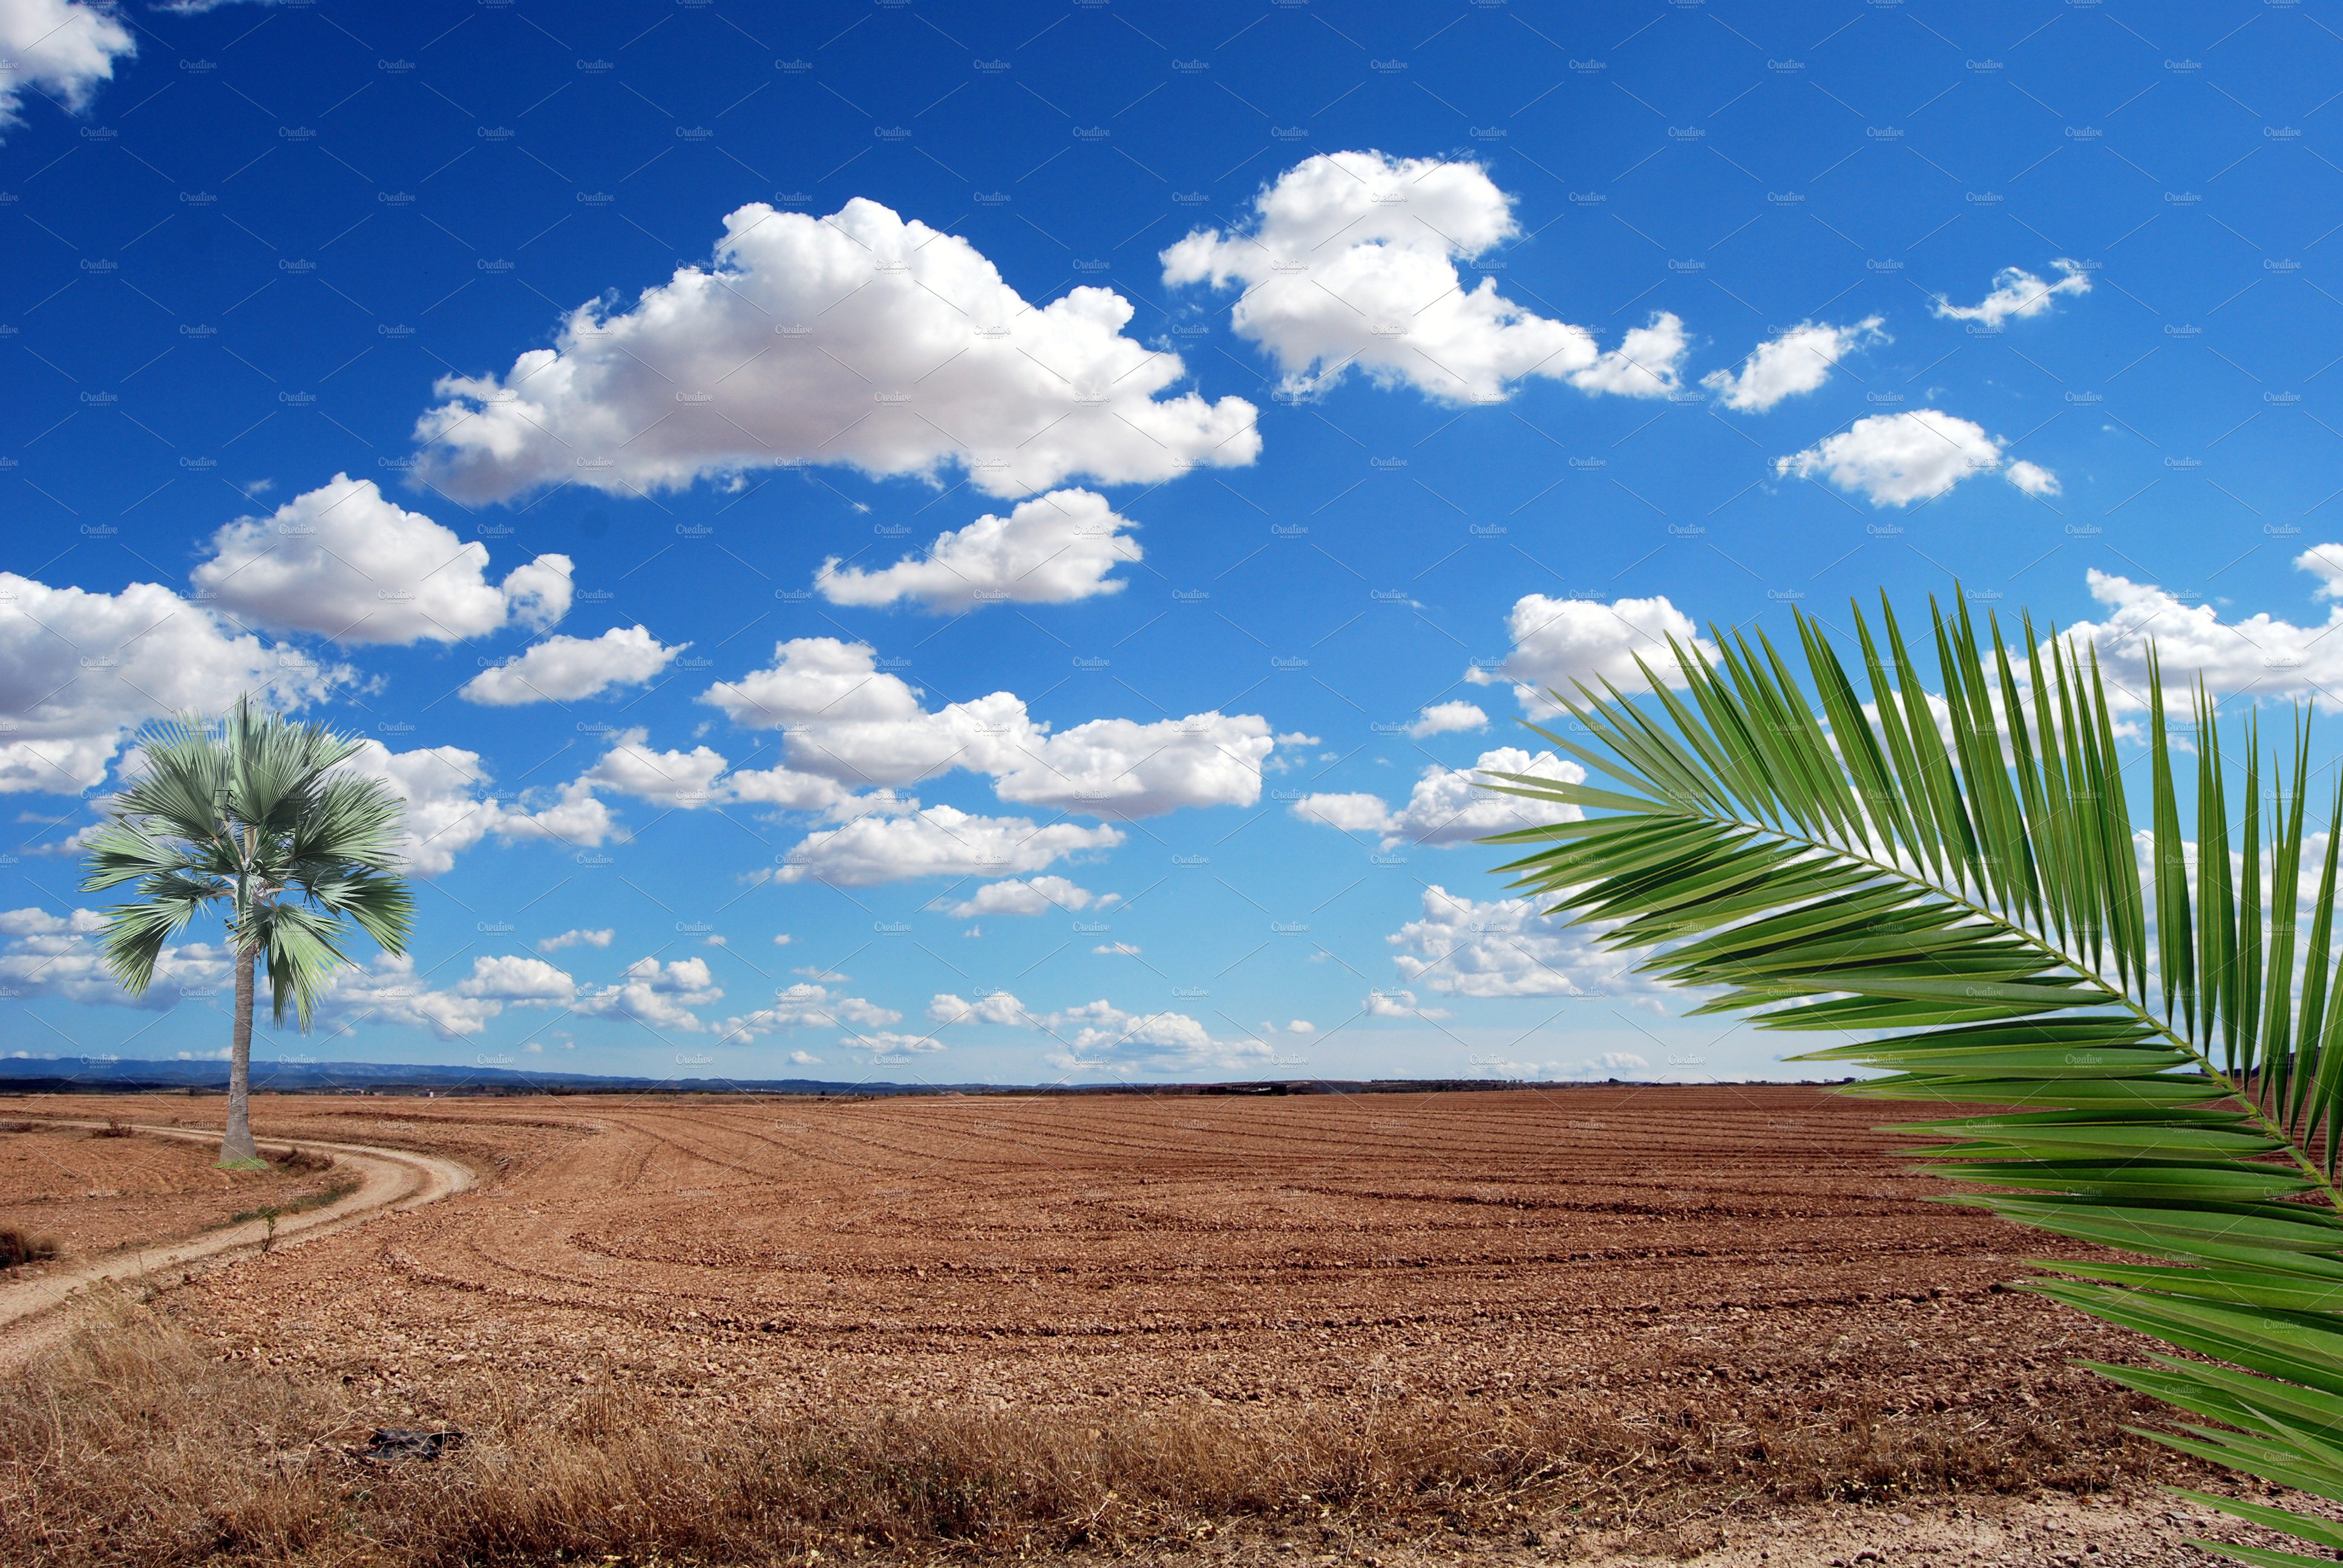 Palm tree in the middle of a field.